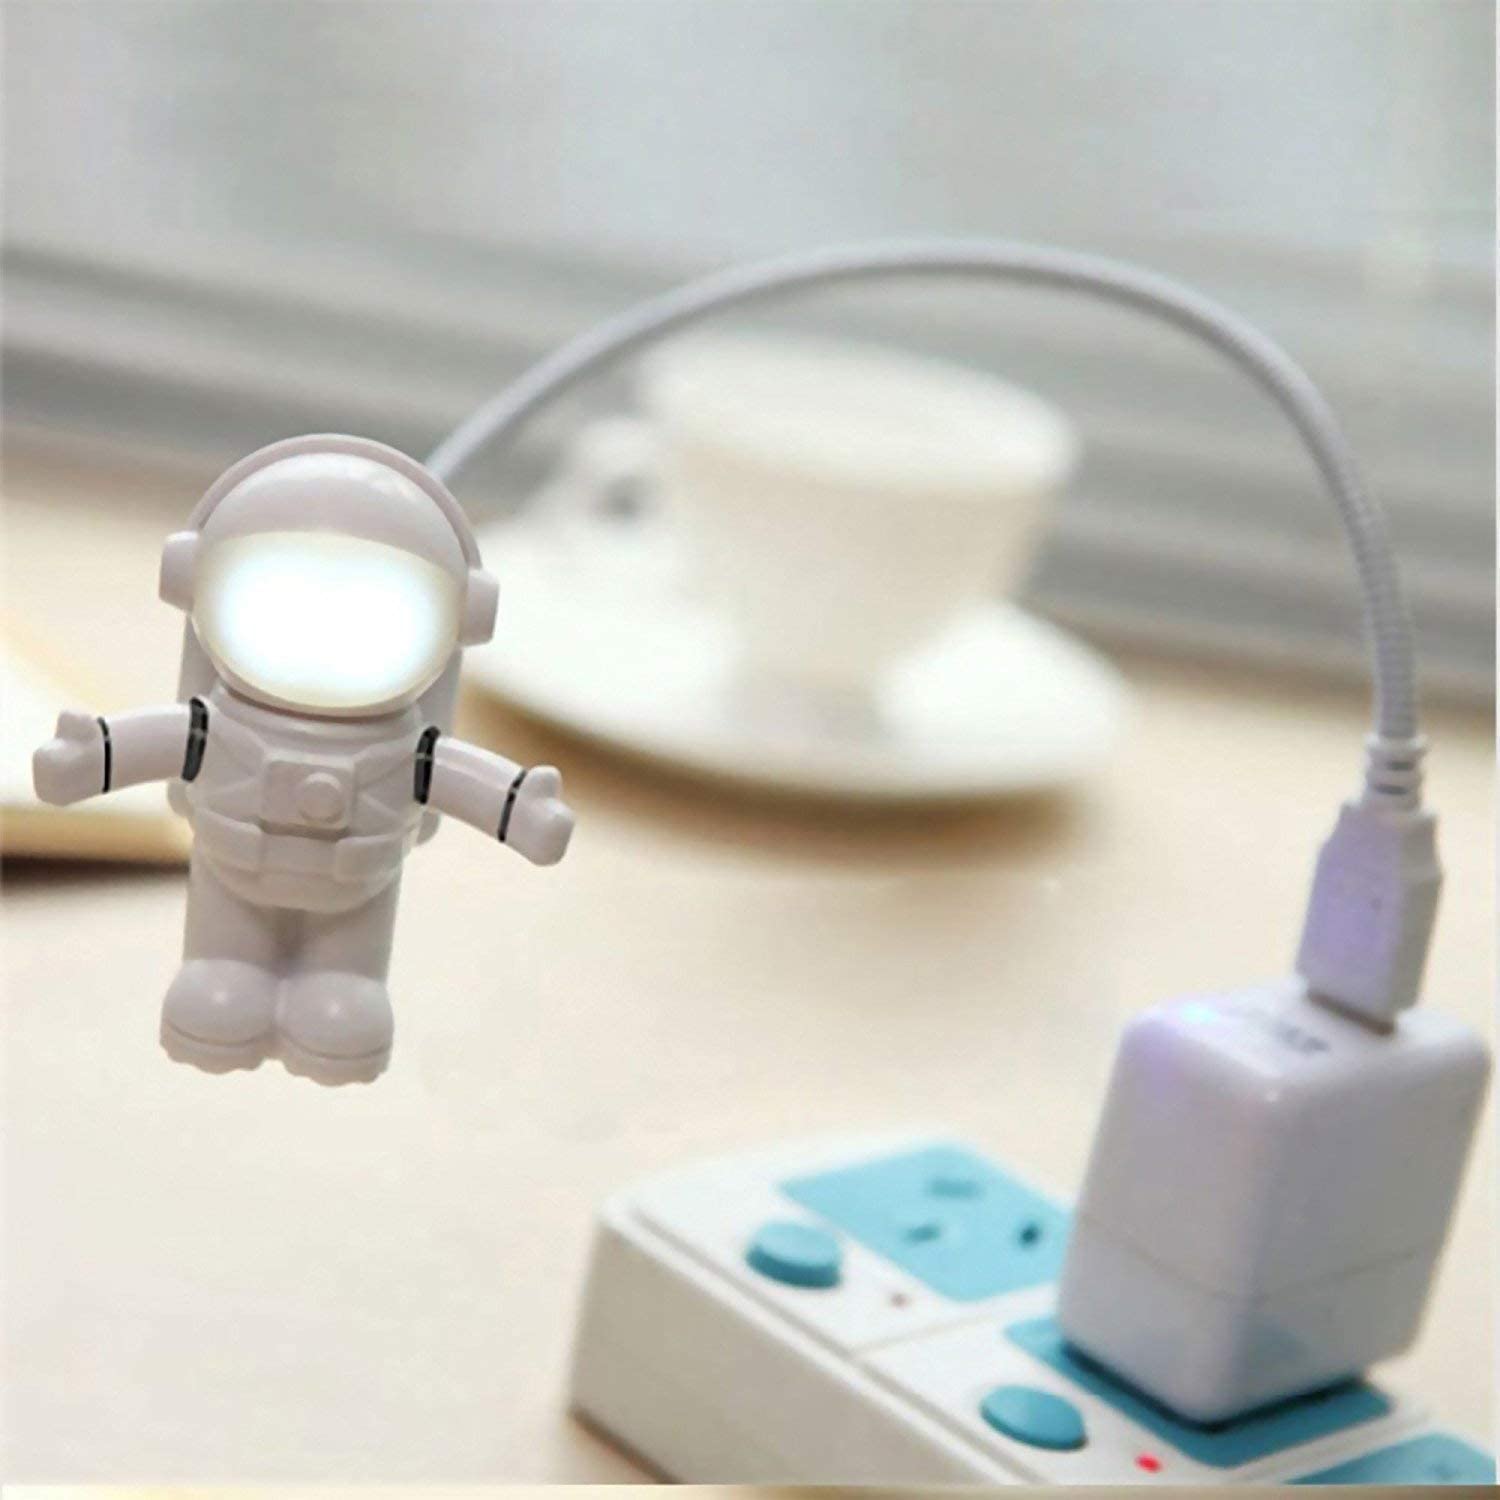 Astronaut USB LED Light Cool Birthday Gifts For Guys Plugged In To Outlet